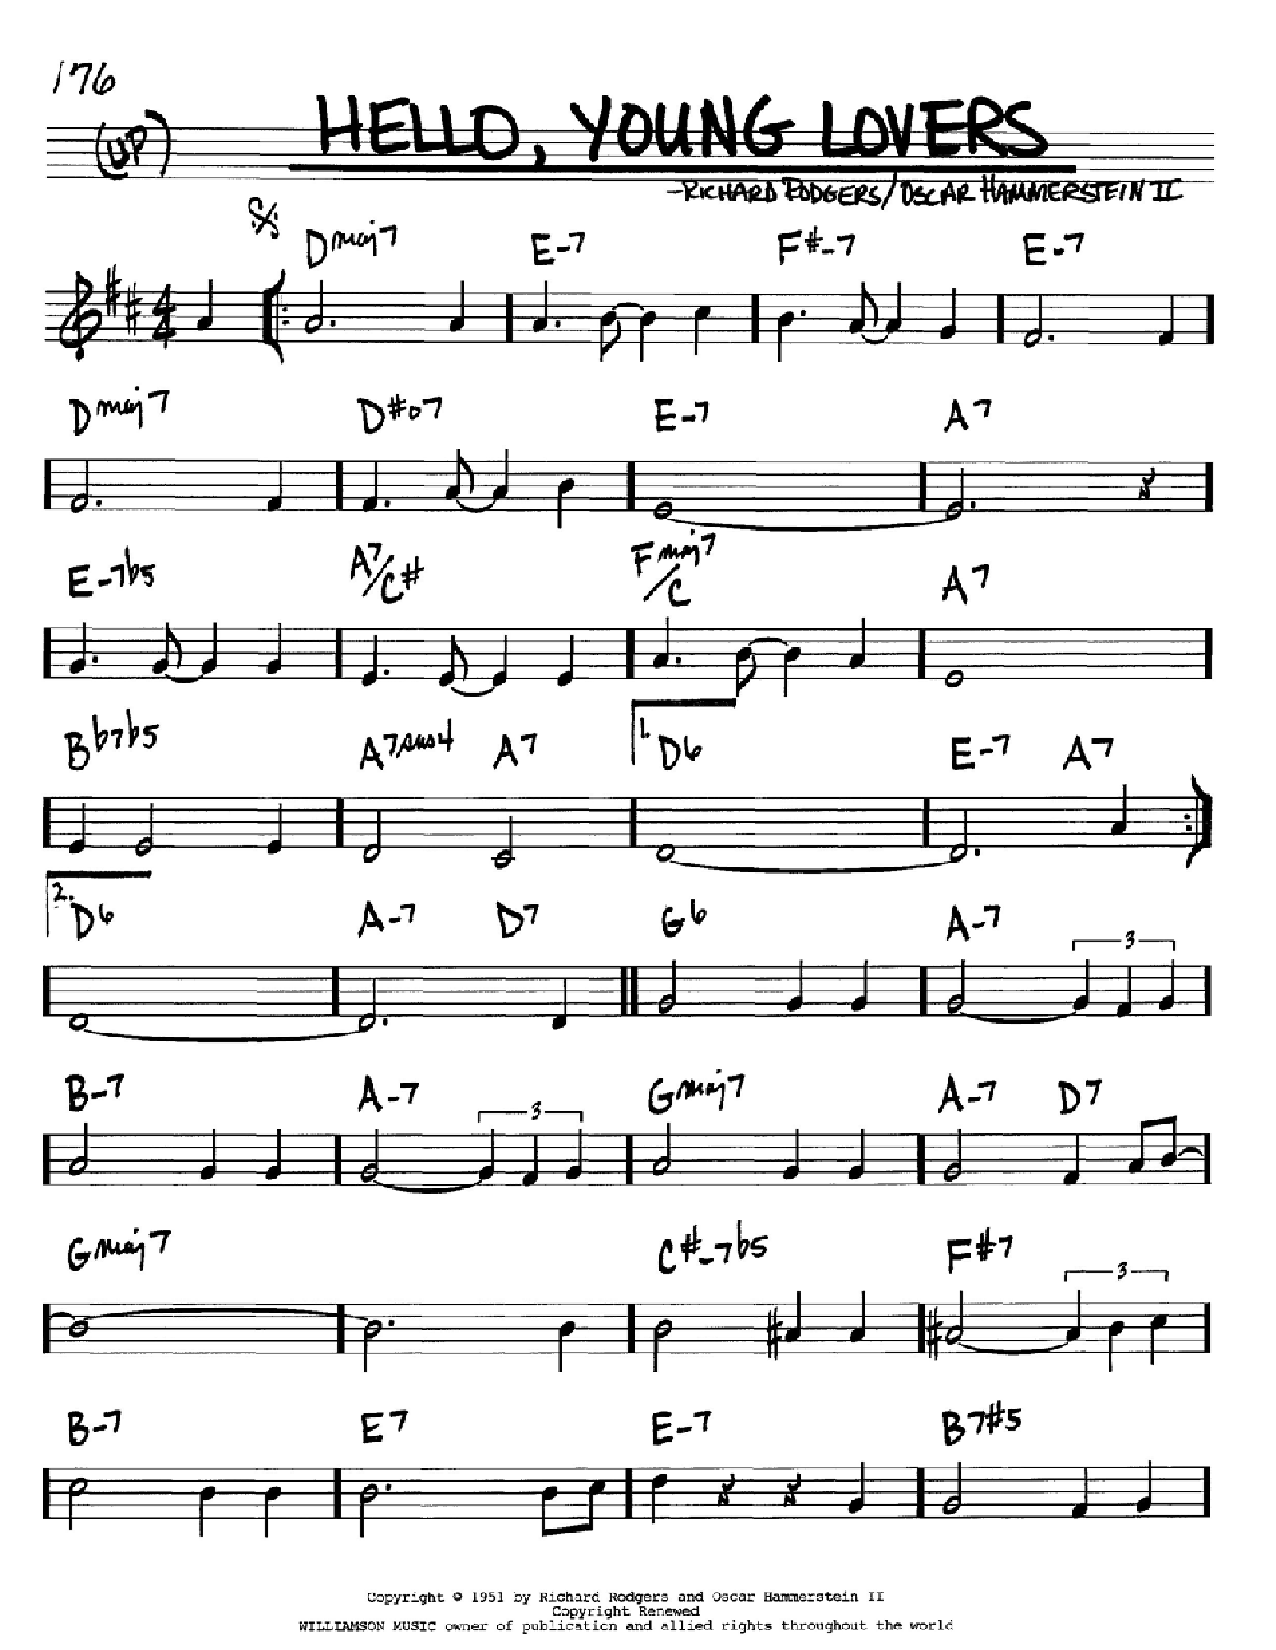 Download Rodgers & Hammerstein Hello, Young Lovers Sheet Music